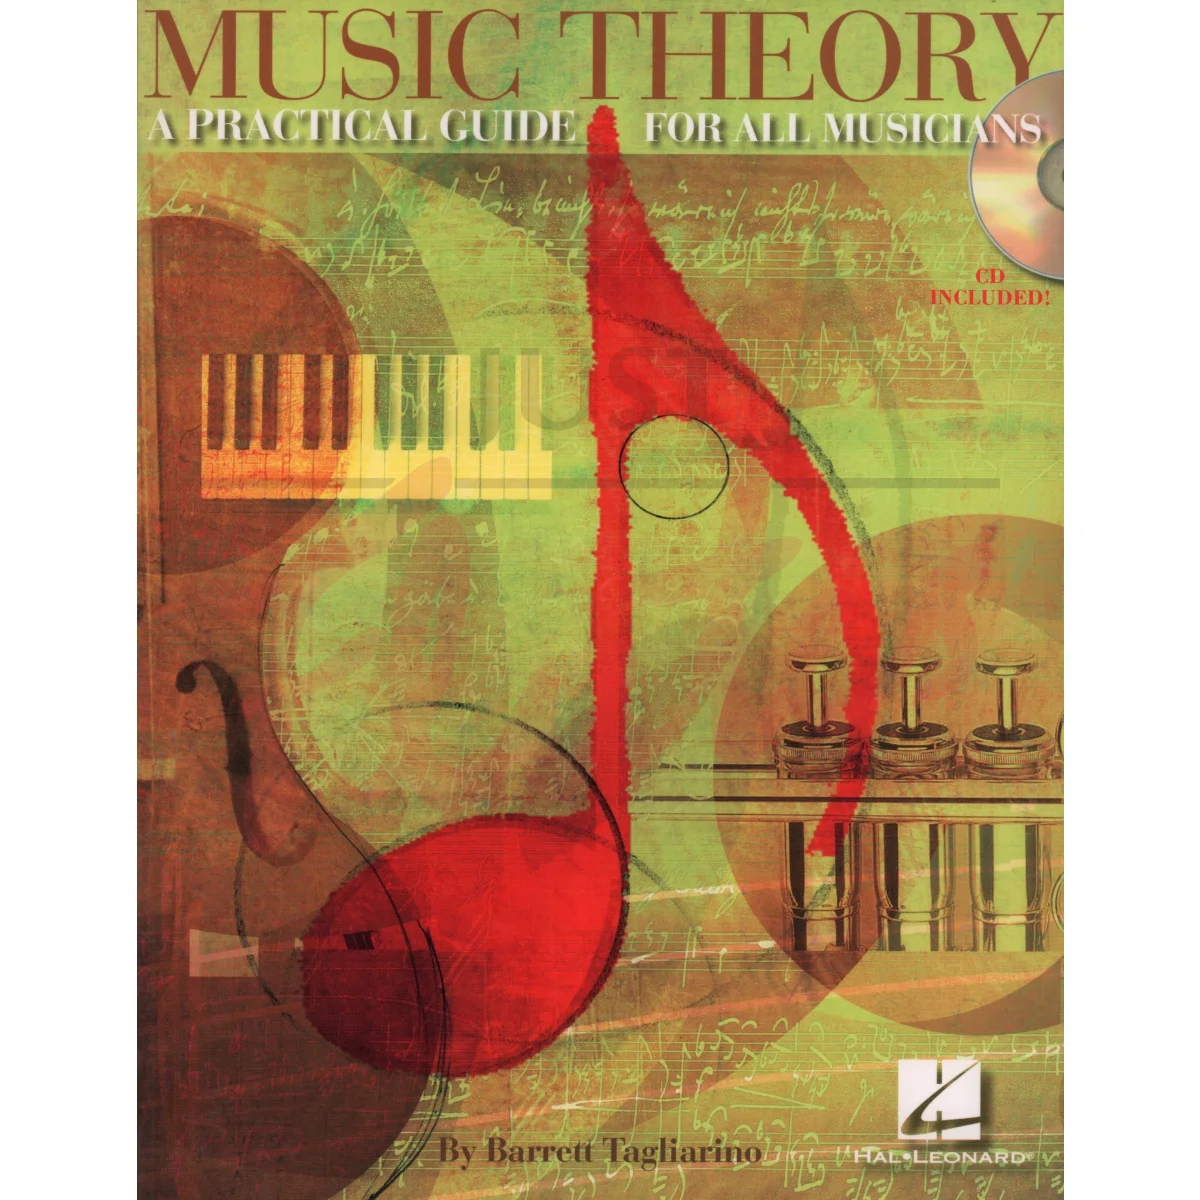 Music Theory: A Practical Guide for All Musicians